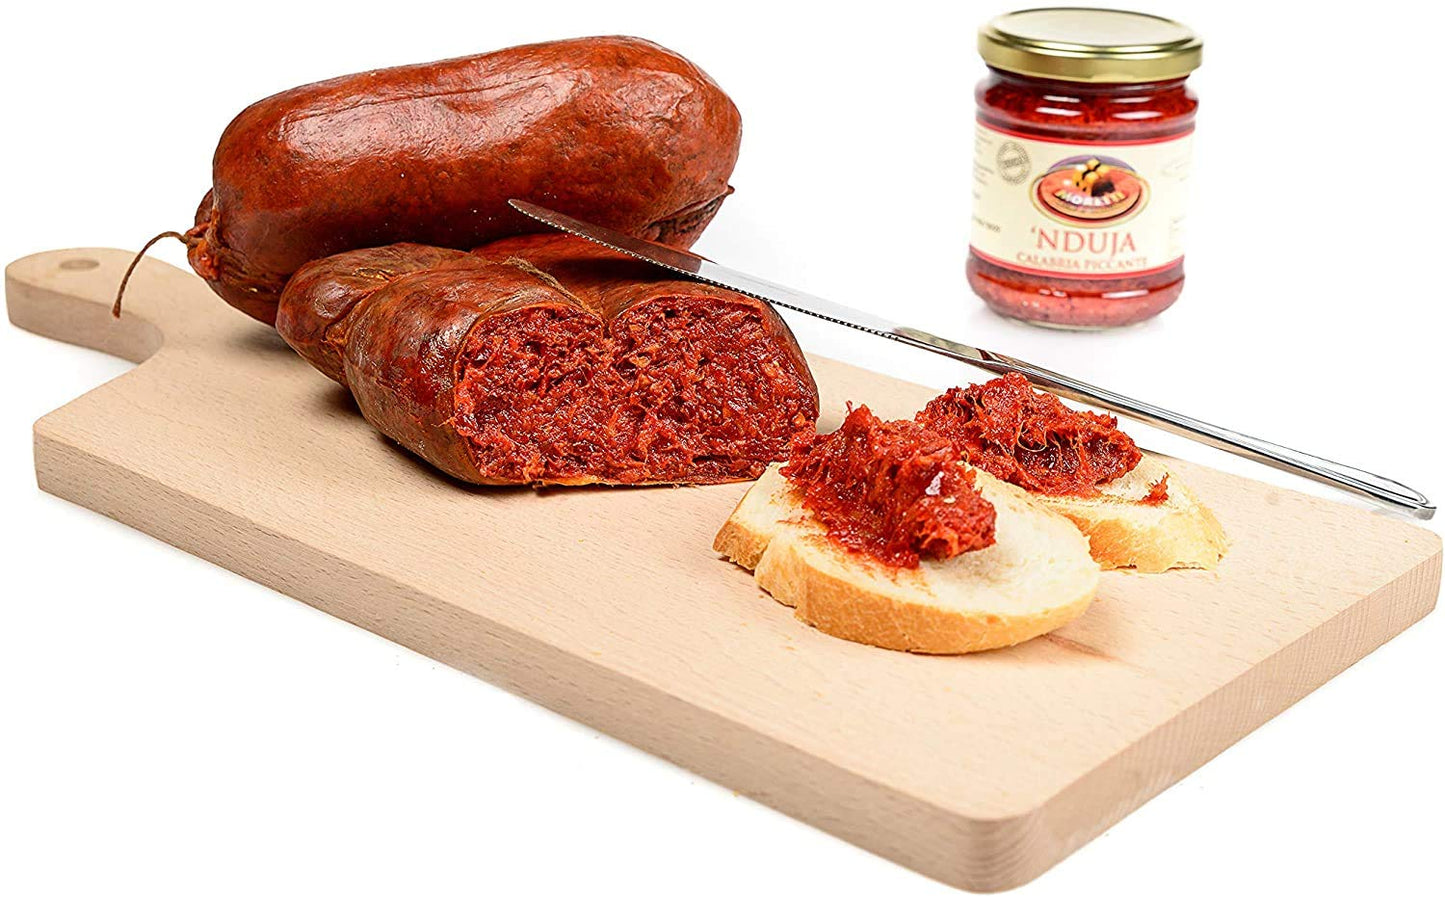 Nduja Spicy Spreadable Sausage (180 g, Pack of 6)